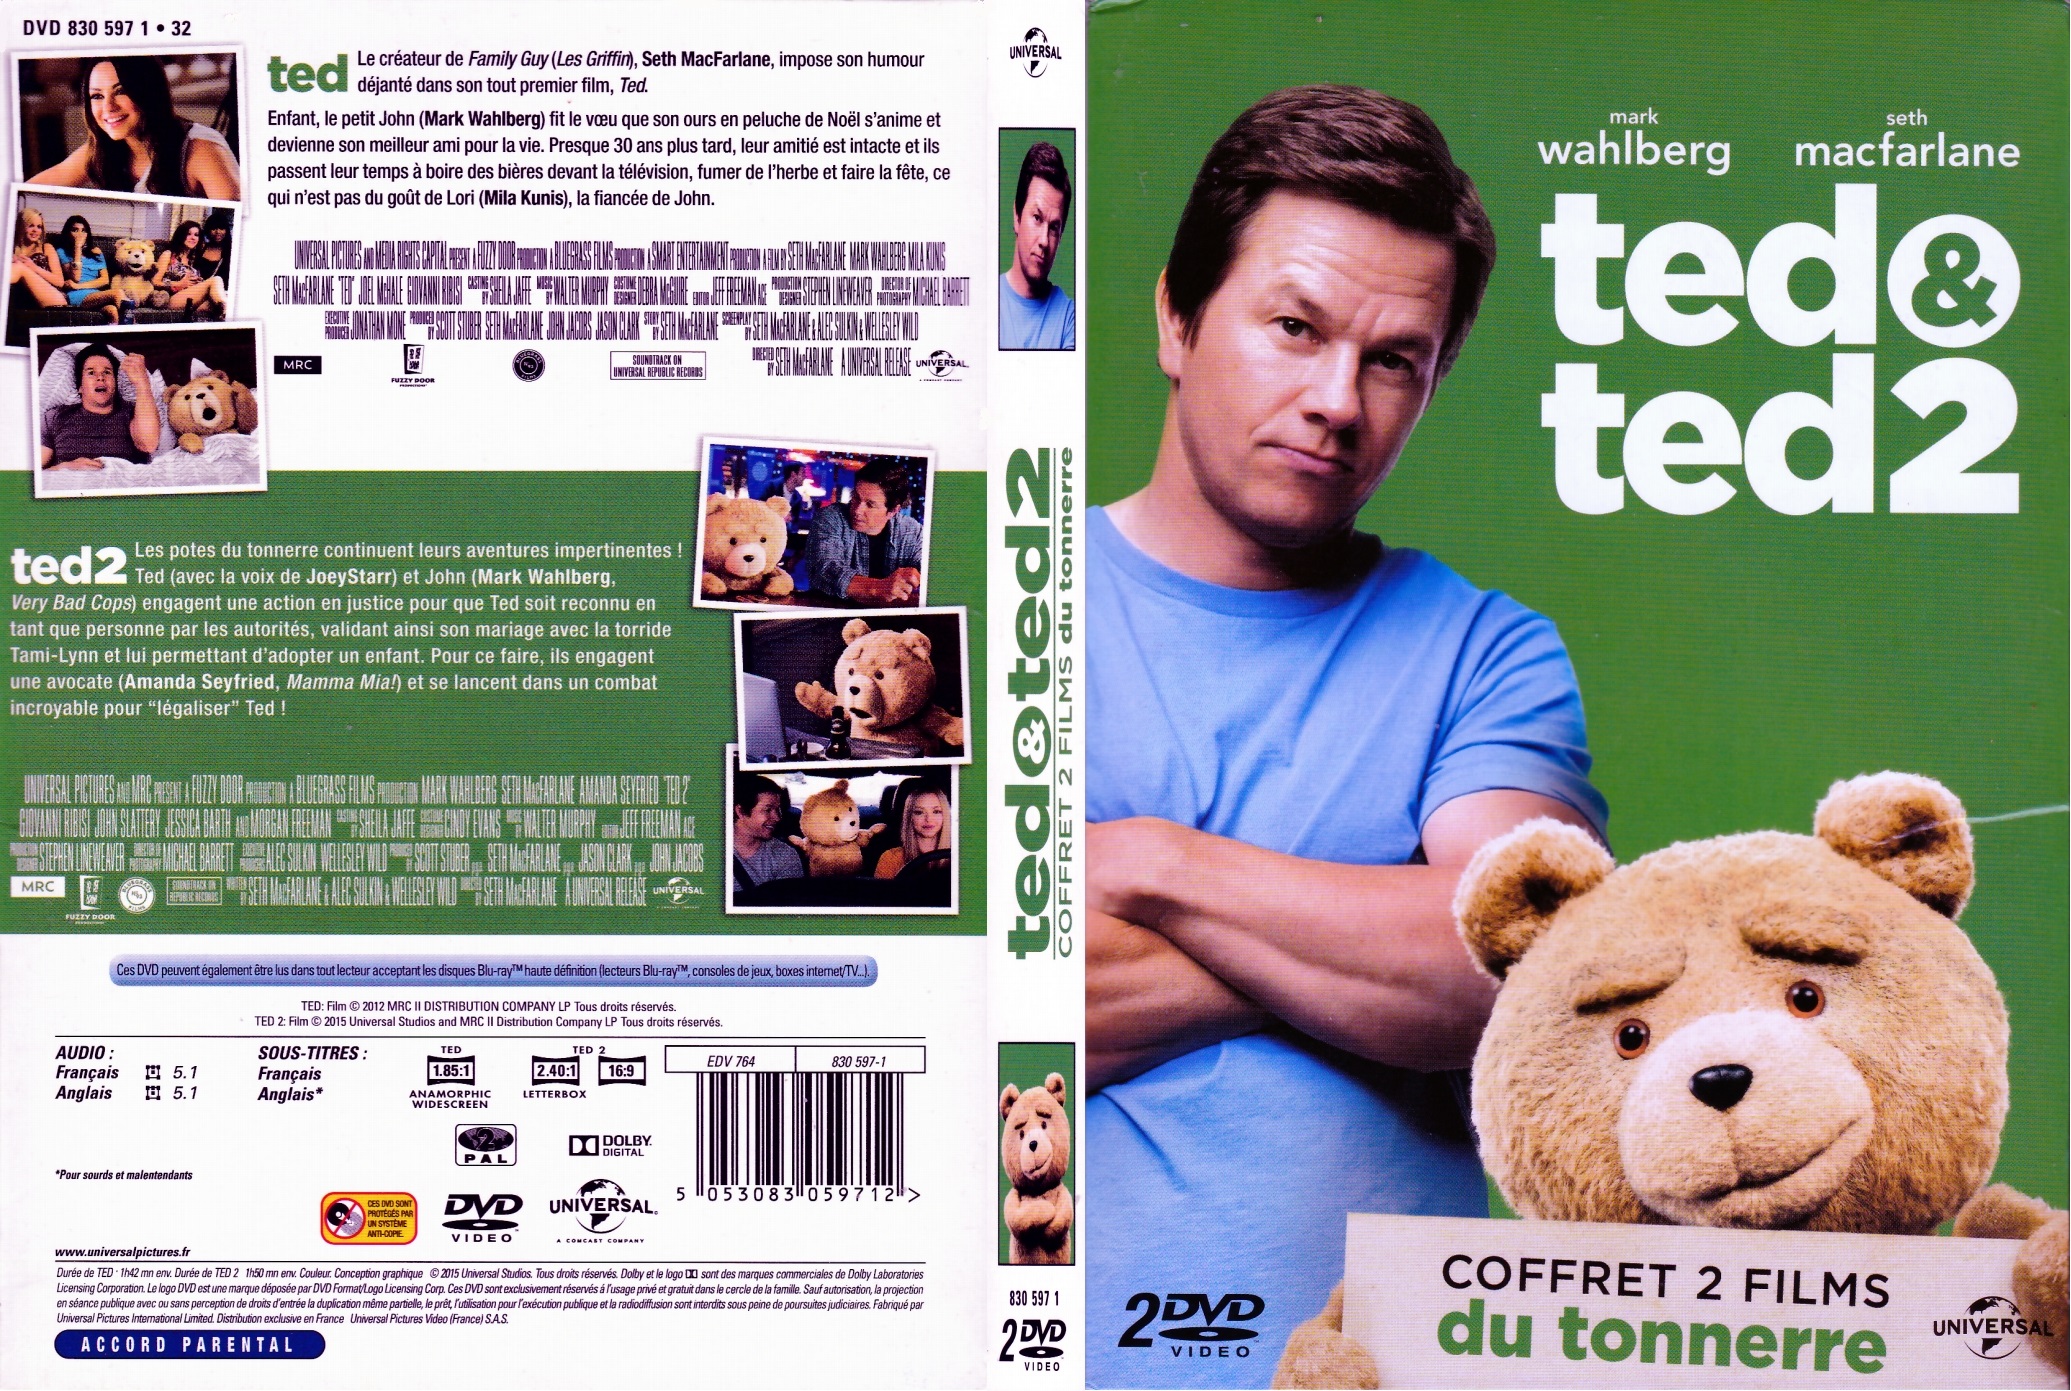 Jaquette DVD Ted & Ted 2 COFFRET